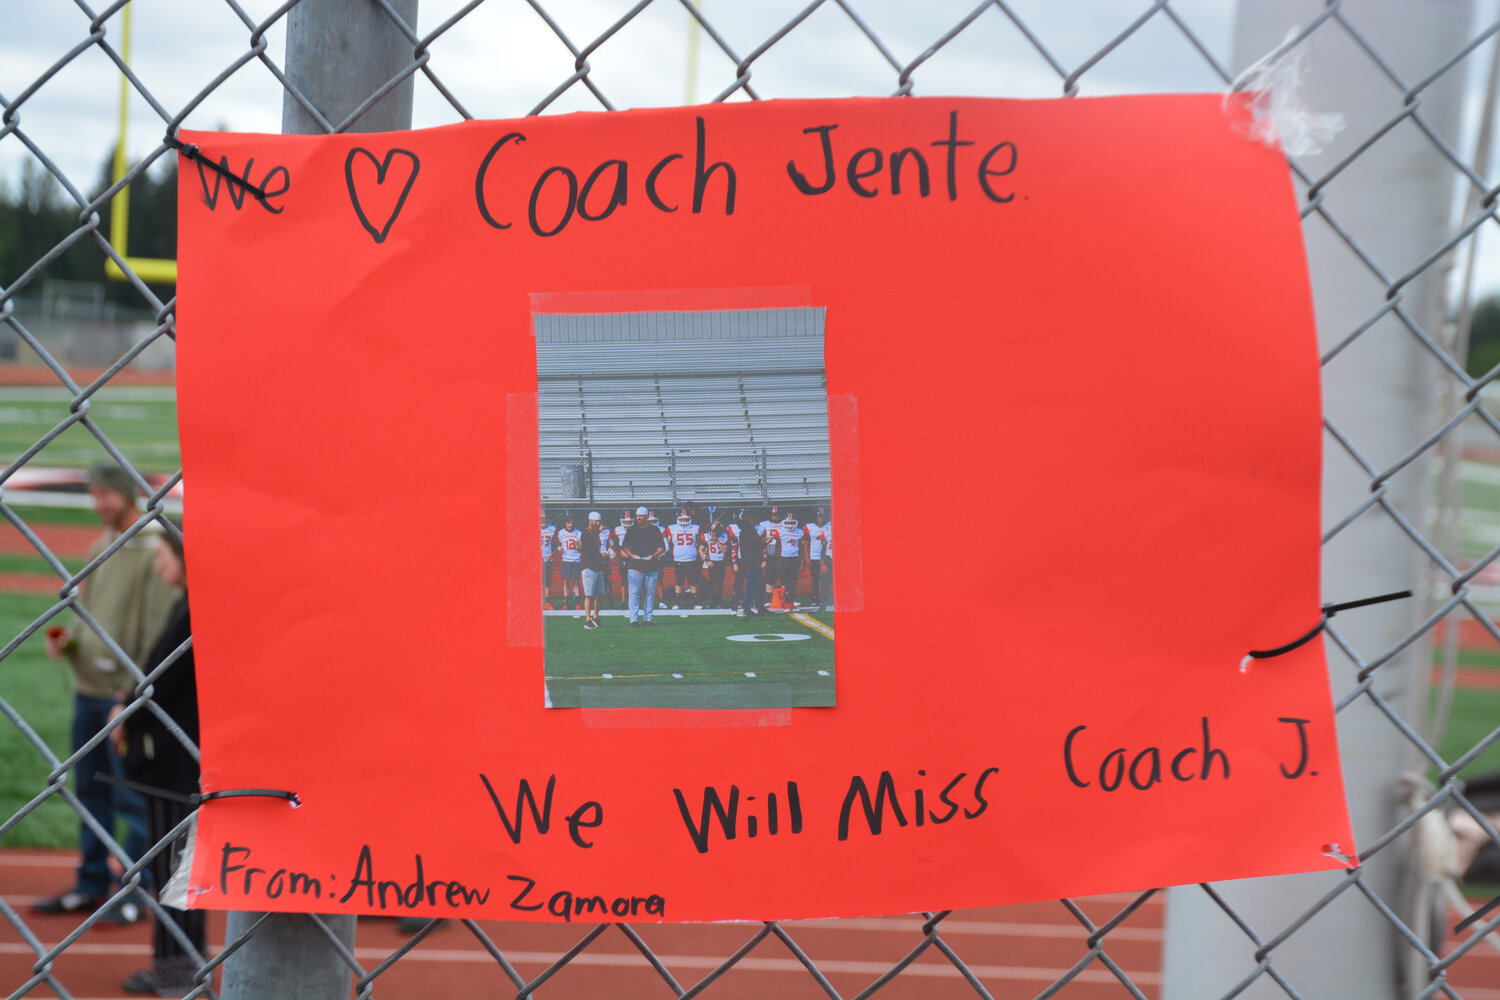 A sign made by athlete Andrew Zamora hangs outside of the Yelm High School football field.